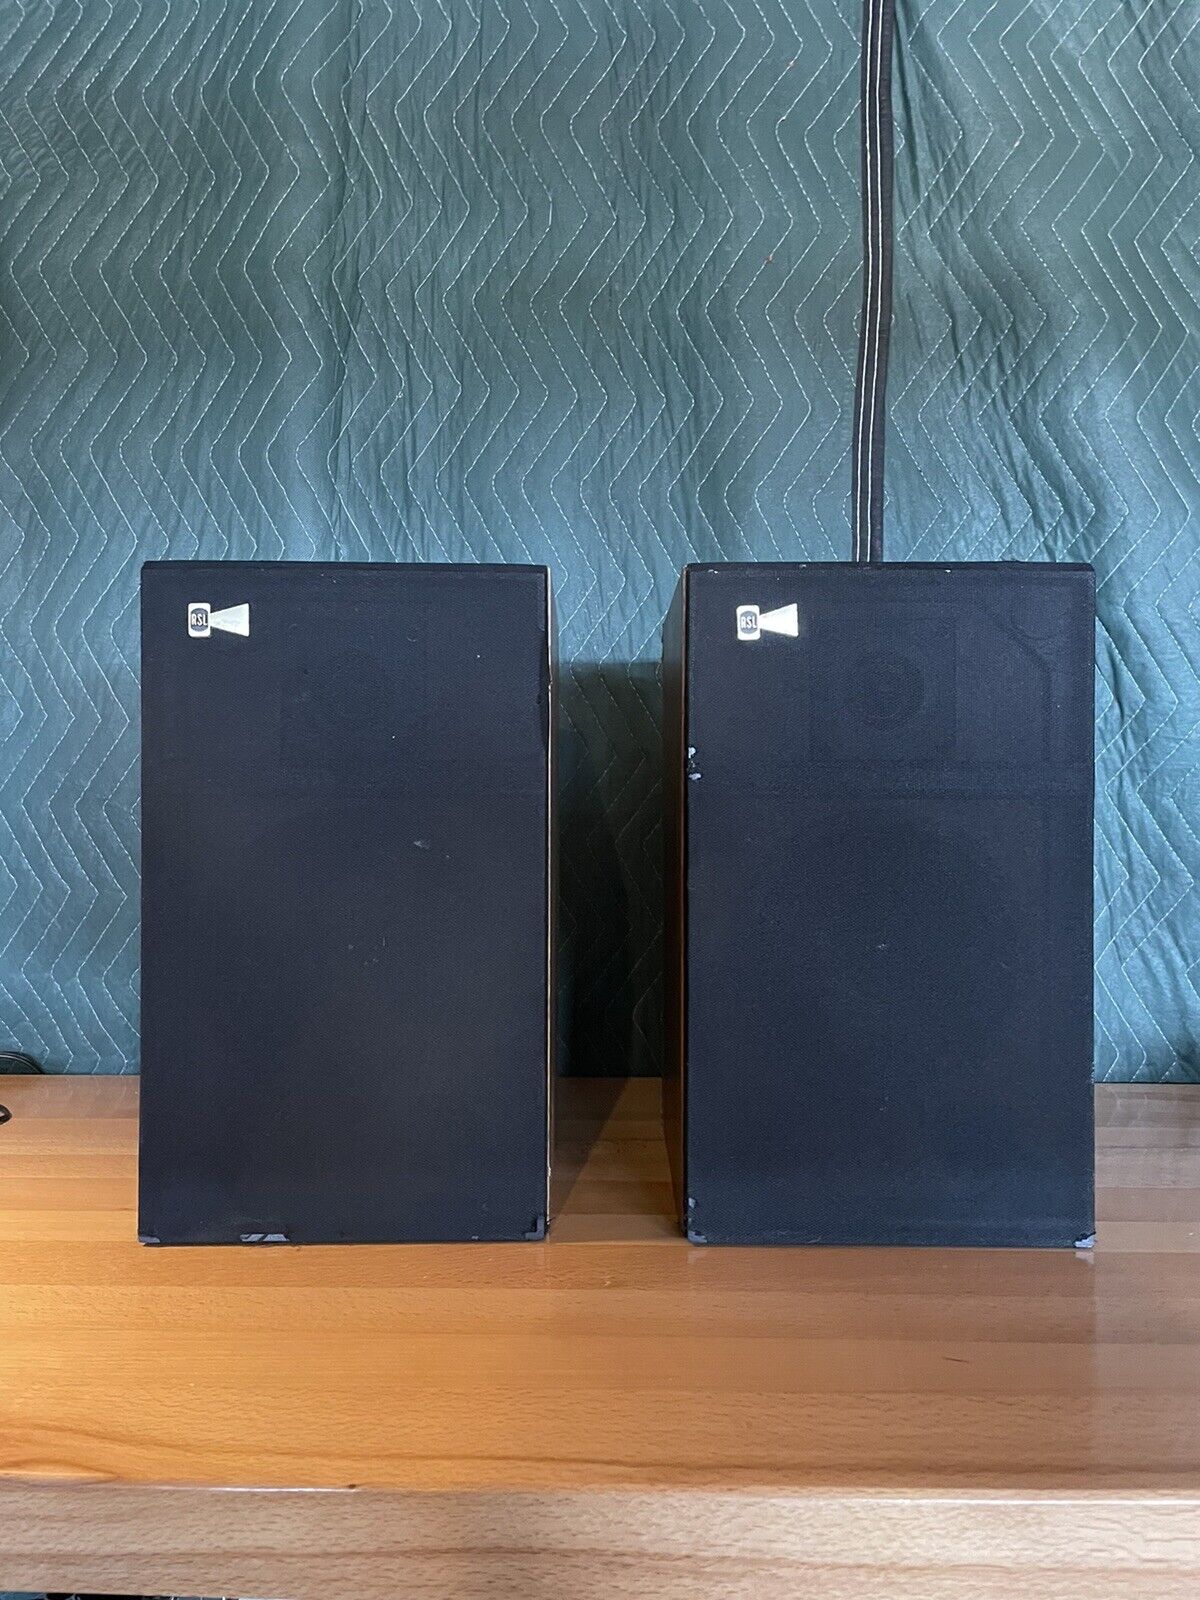 UNTESTED Vintage Pair Of Rogers Sound Lab Speakers RSL Speakers AS IS NOT TESTED